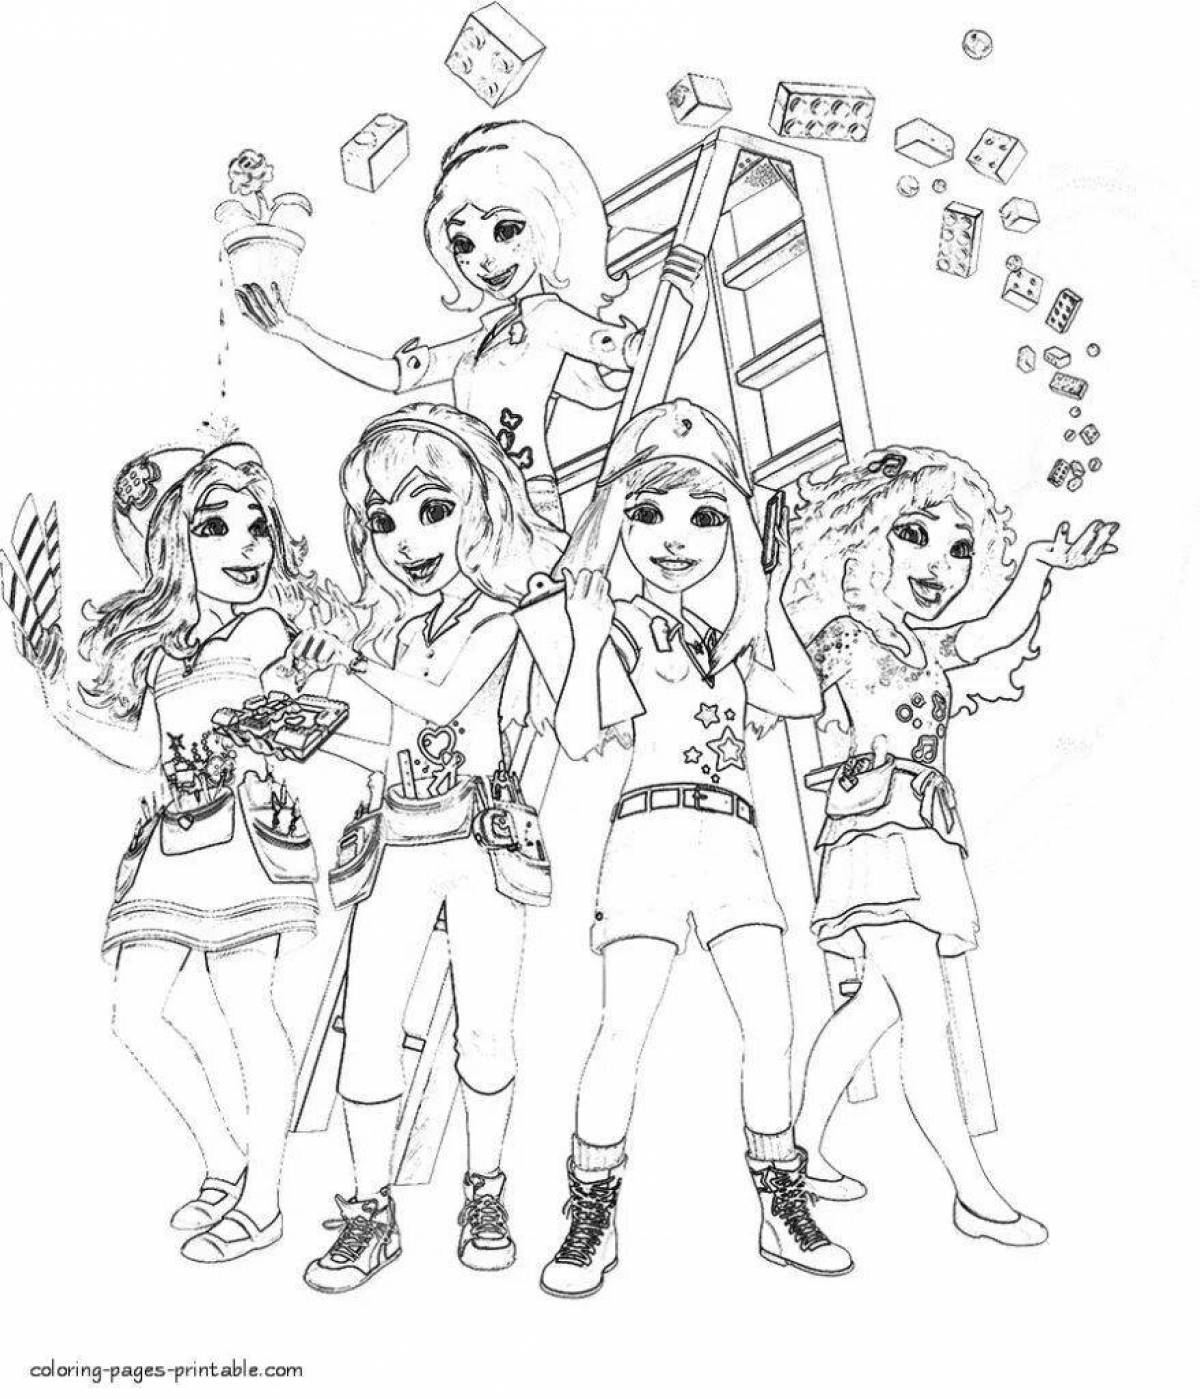 Rough Rogue Friends coloring page